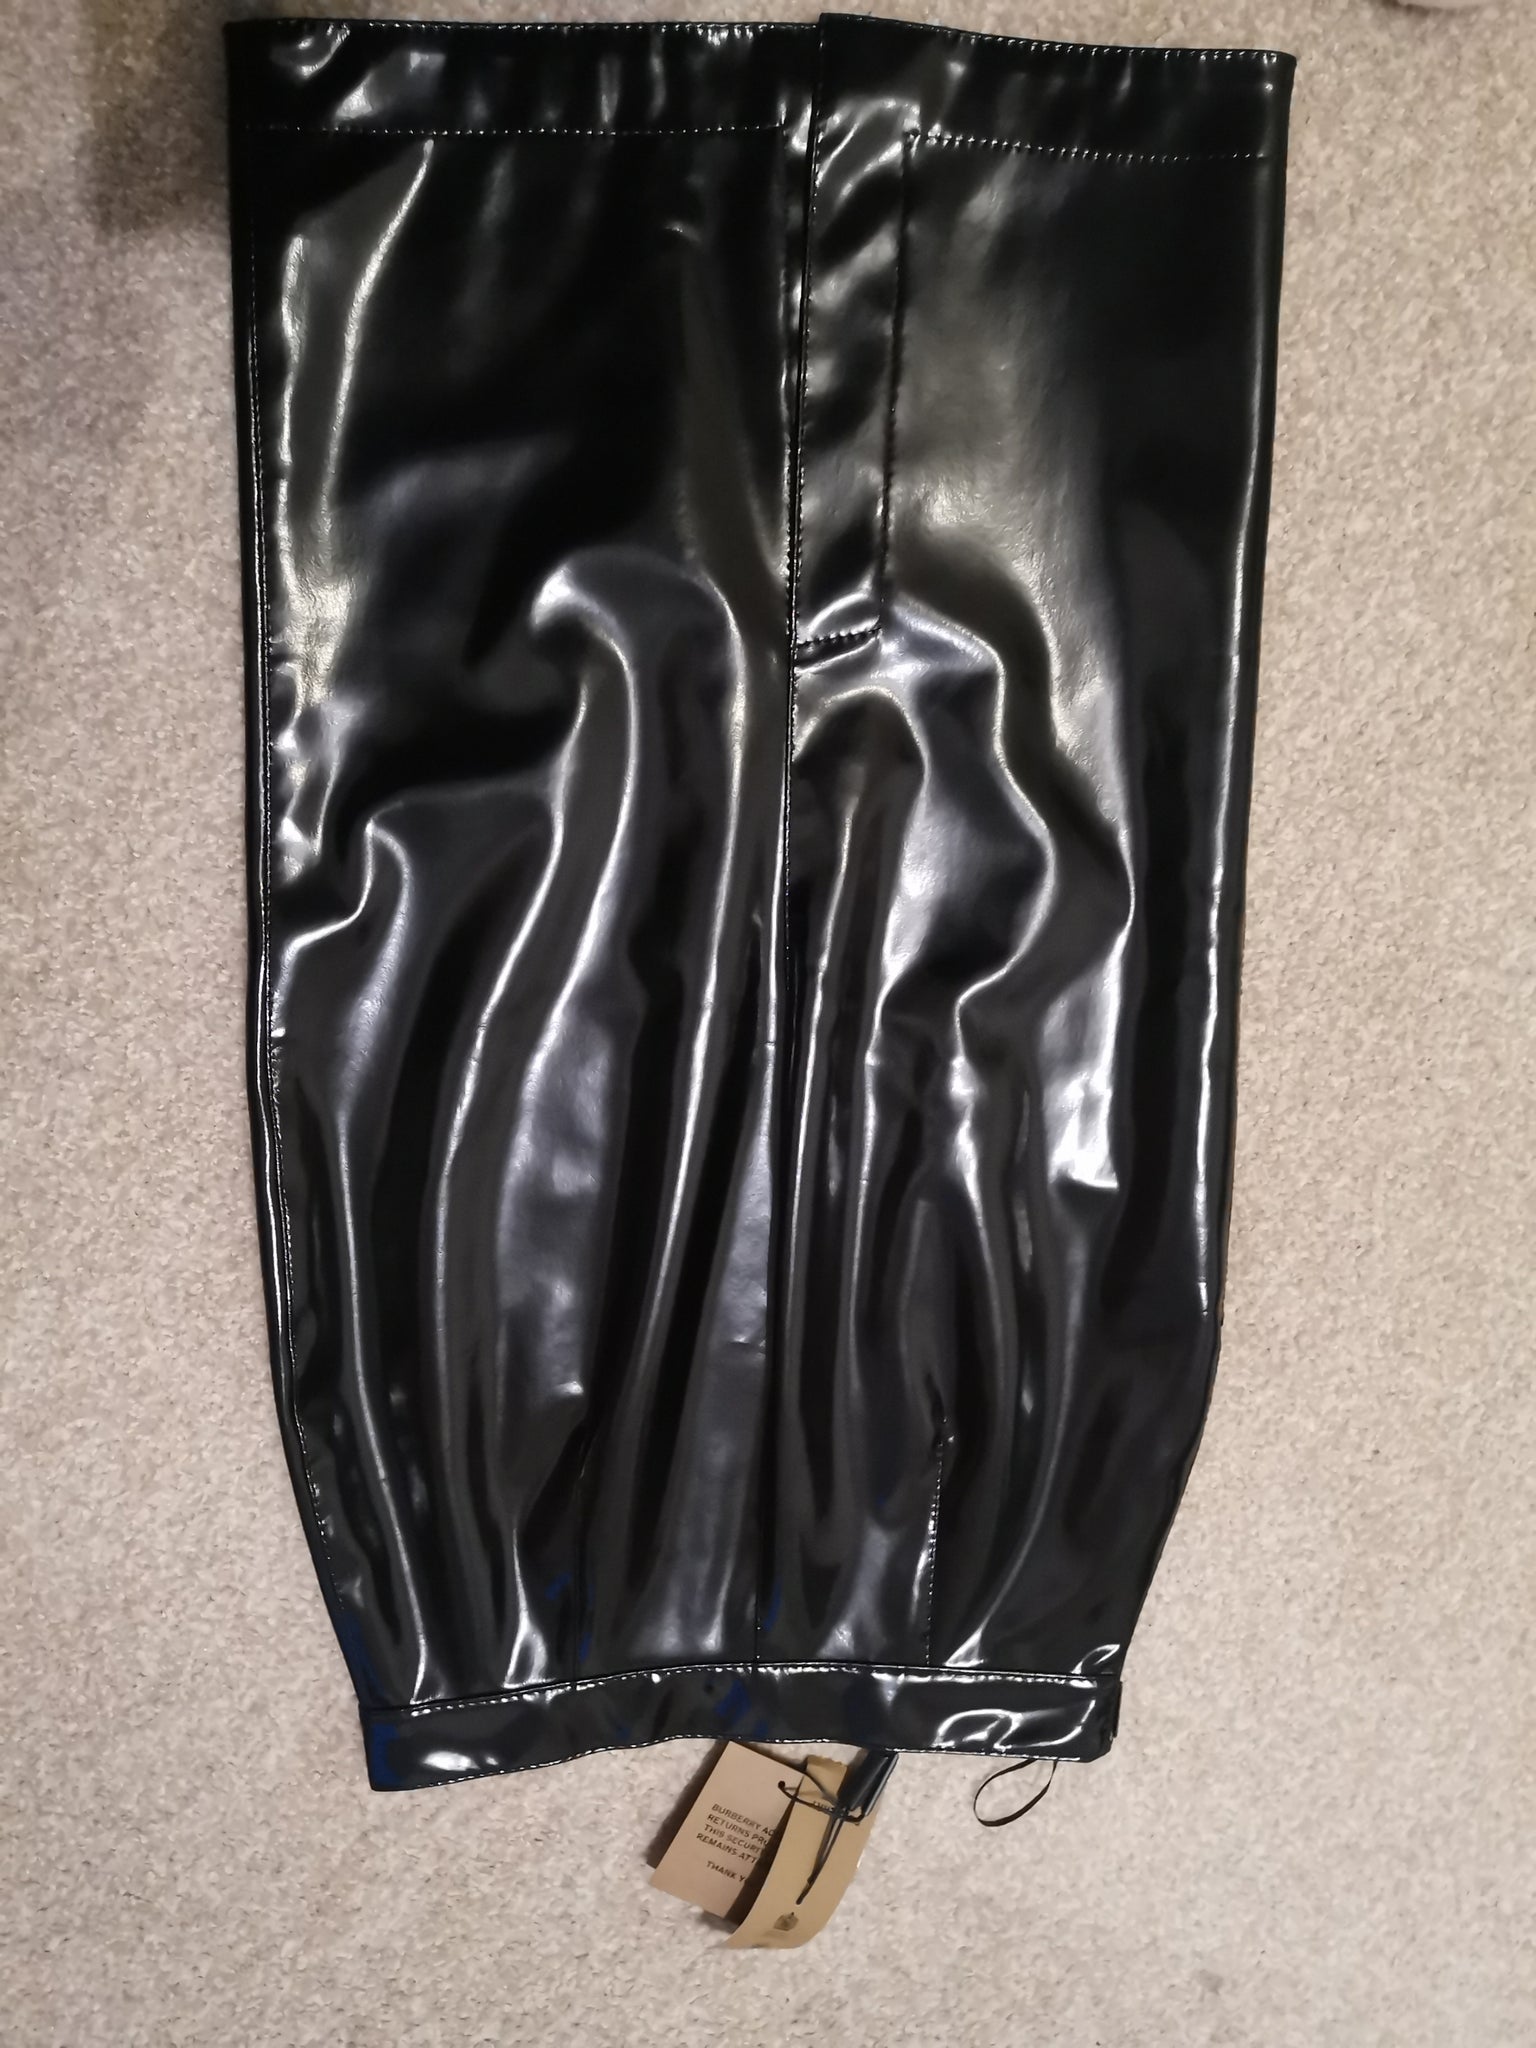 ON SALE! Burberry black leather skirt size 4